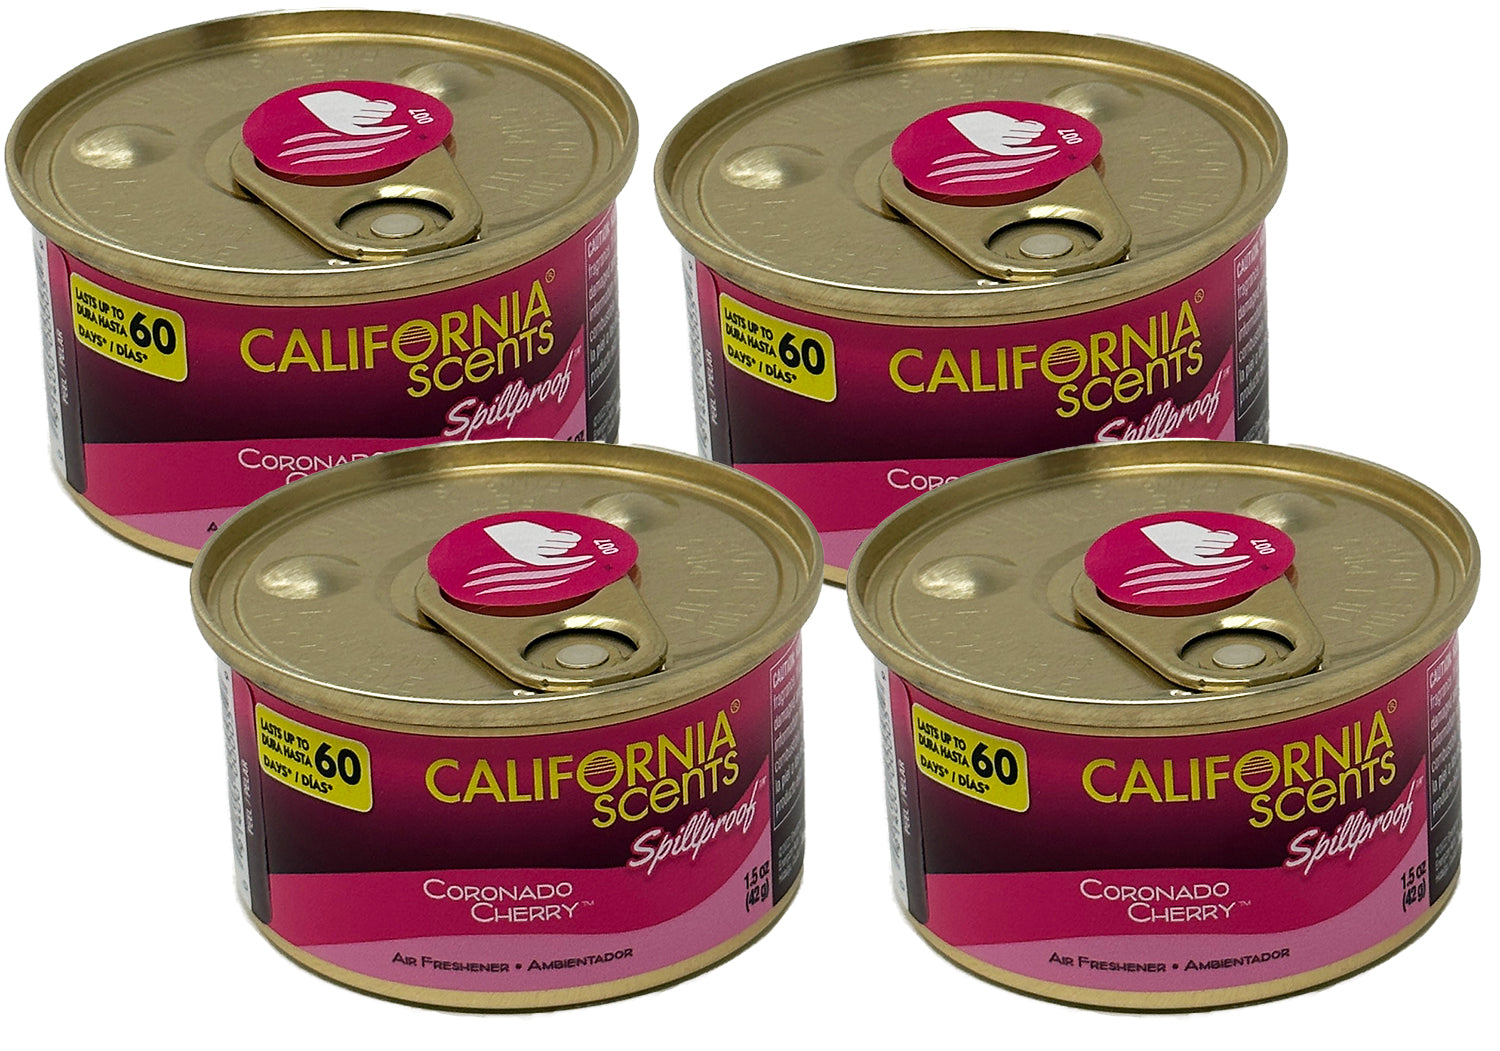 California Scents Spillproof Car Air Freshener - The Best Car Air Freshener  and Odor Eliminator for Your Vehicle, Coronado Cherry-4 Packs by GOSO Direct